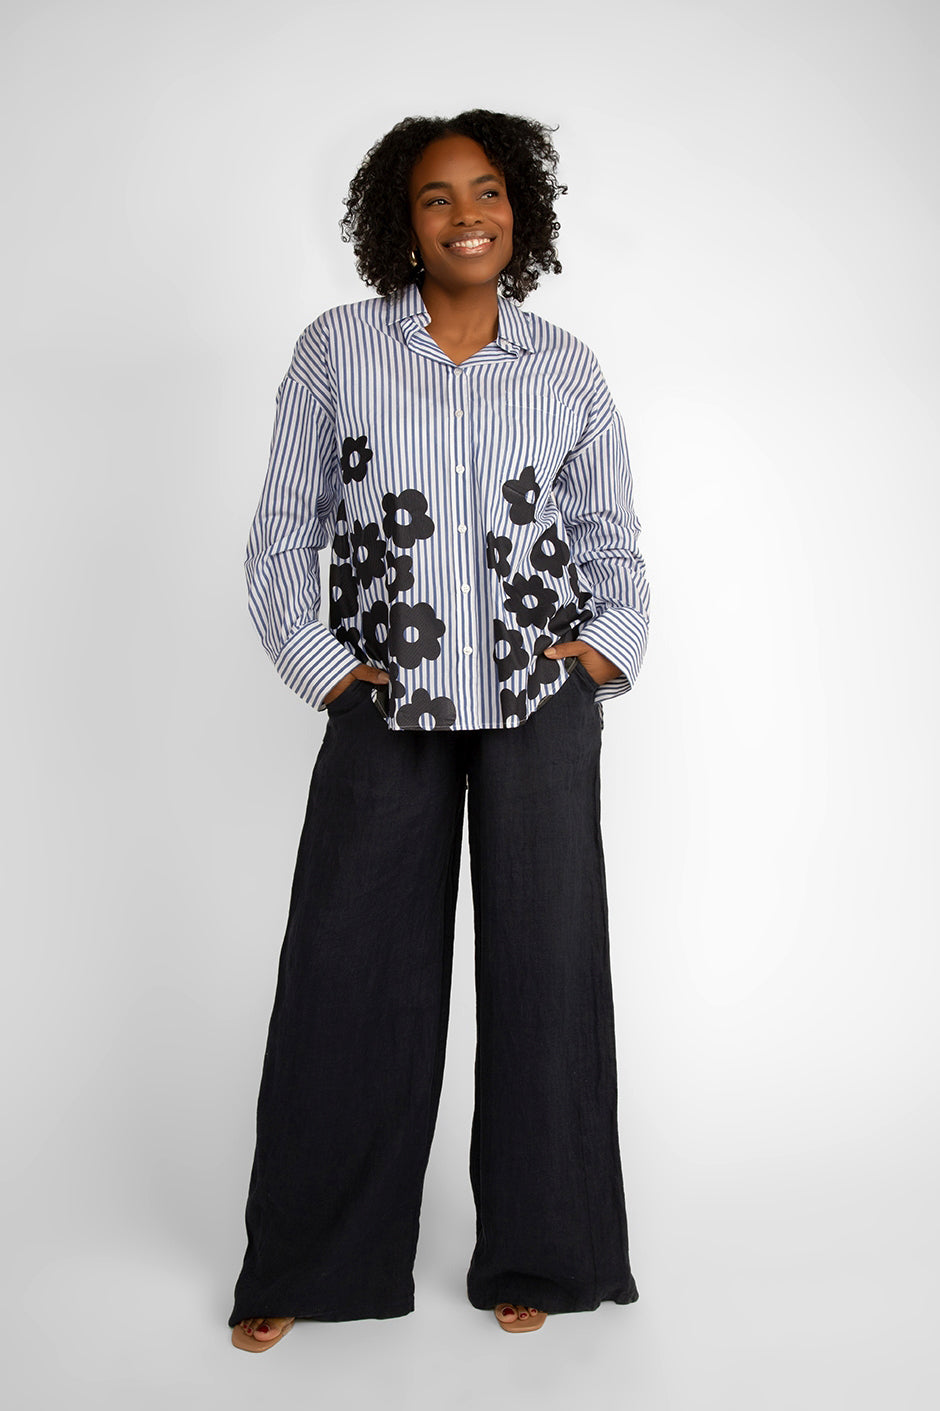 Carre Noir (6866) Women's Long Sleeve Blue & White Striped Button Up Shirt With Black Flowers along the front hem and lower half of the top